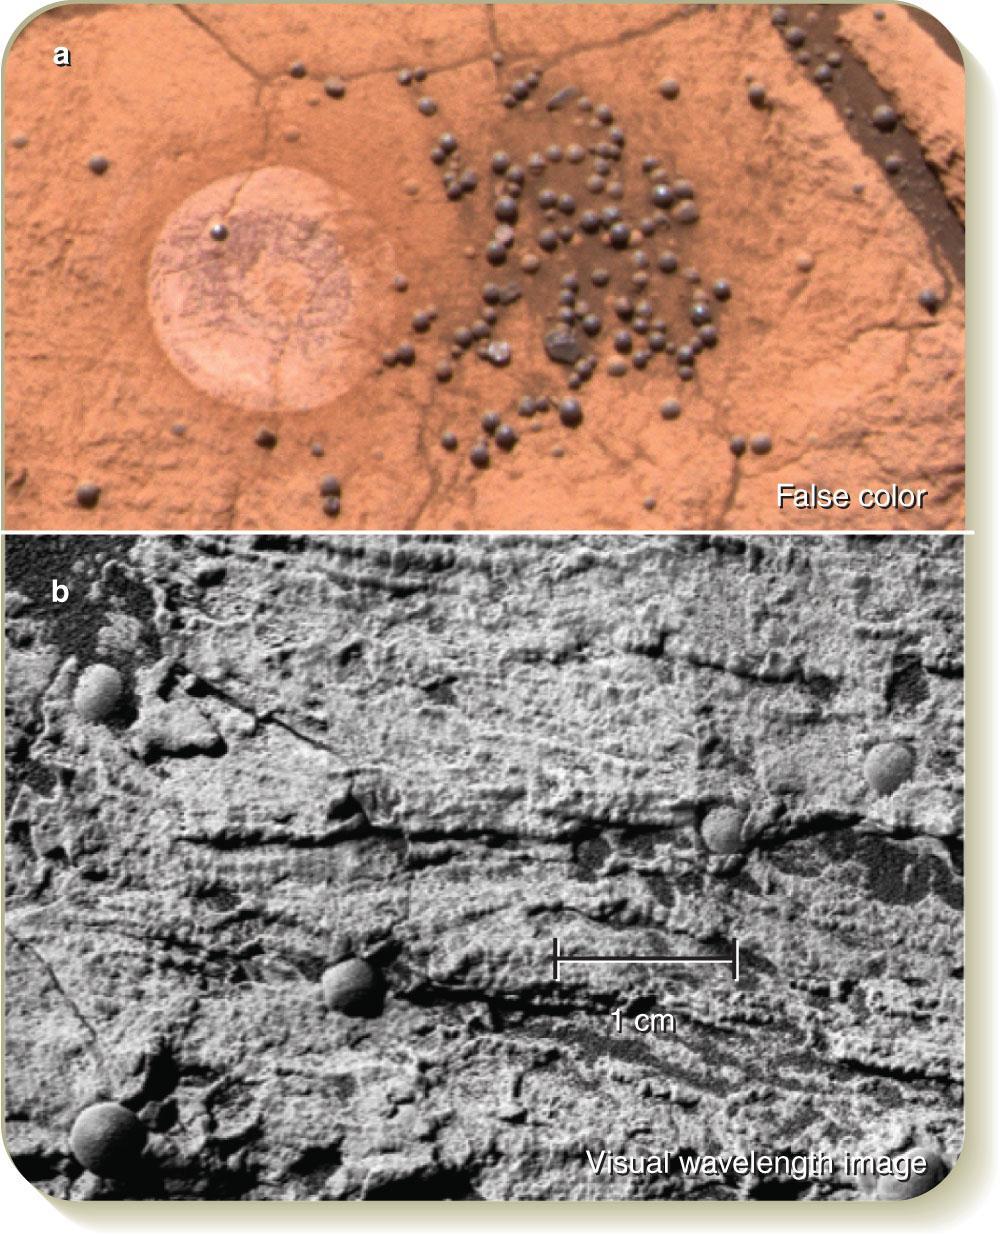 Evidence for Past Water on Mars Hermatite concretions (spheres) photographed by Mars Rover